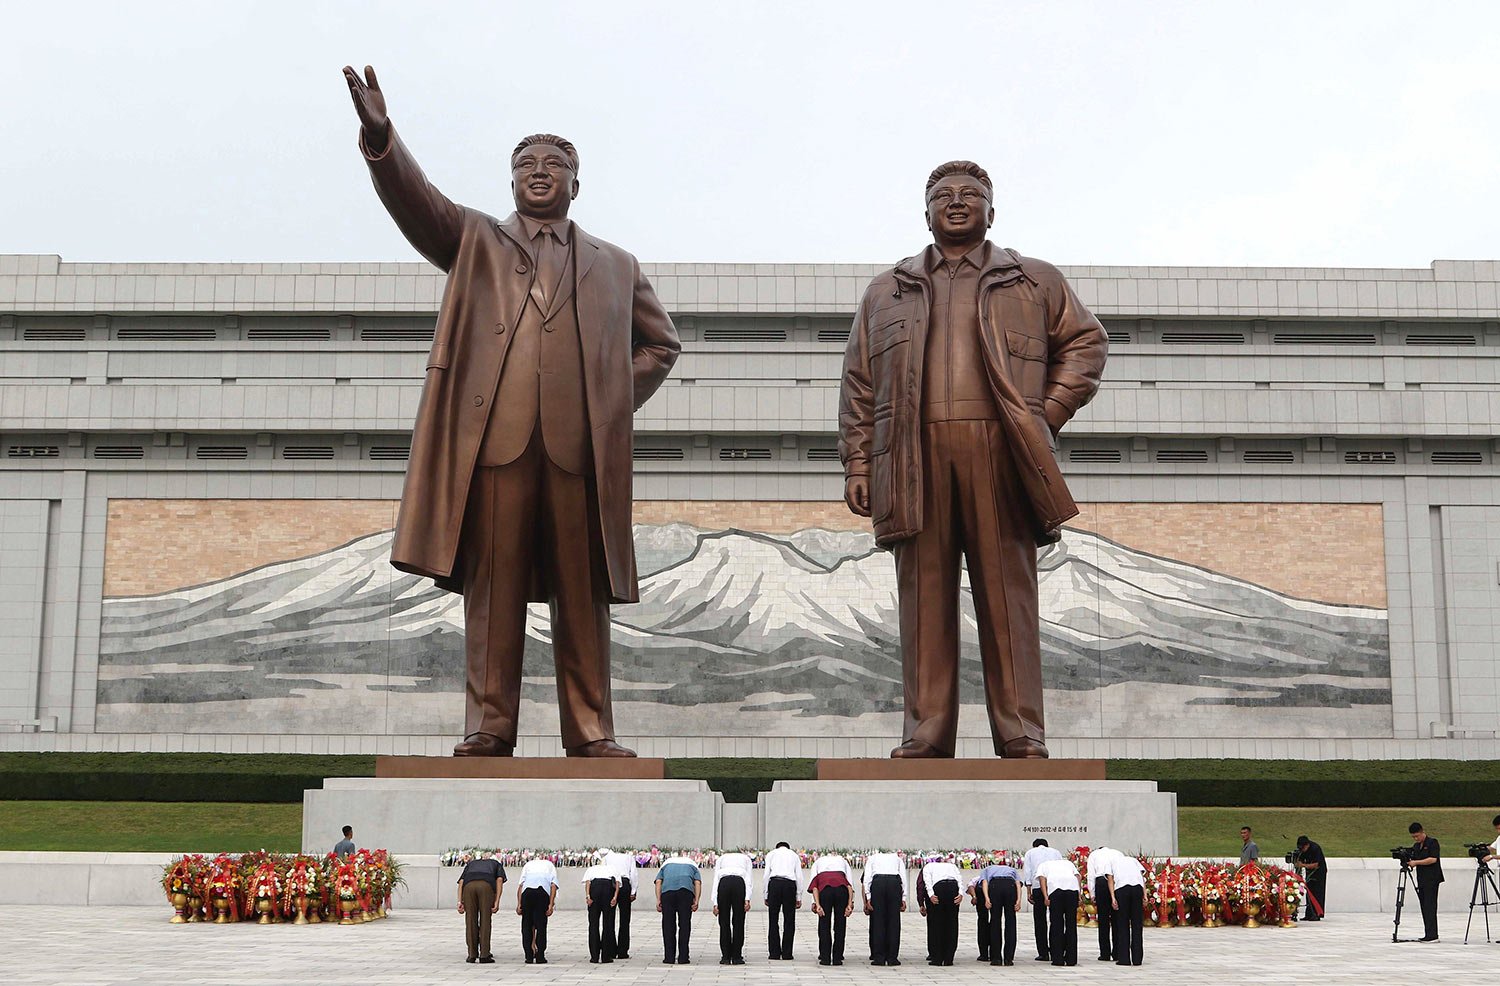  Pyongyang citizens pay tribute to the statues of their late leaders Kim Il Sung and Kim Jong Il on Mansu Hill on the occasion of the 62nd anniversary of Kim Jong Il's first field guidance for the revolutionary armed forces in Pyongyang, North Korea 